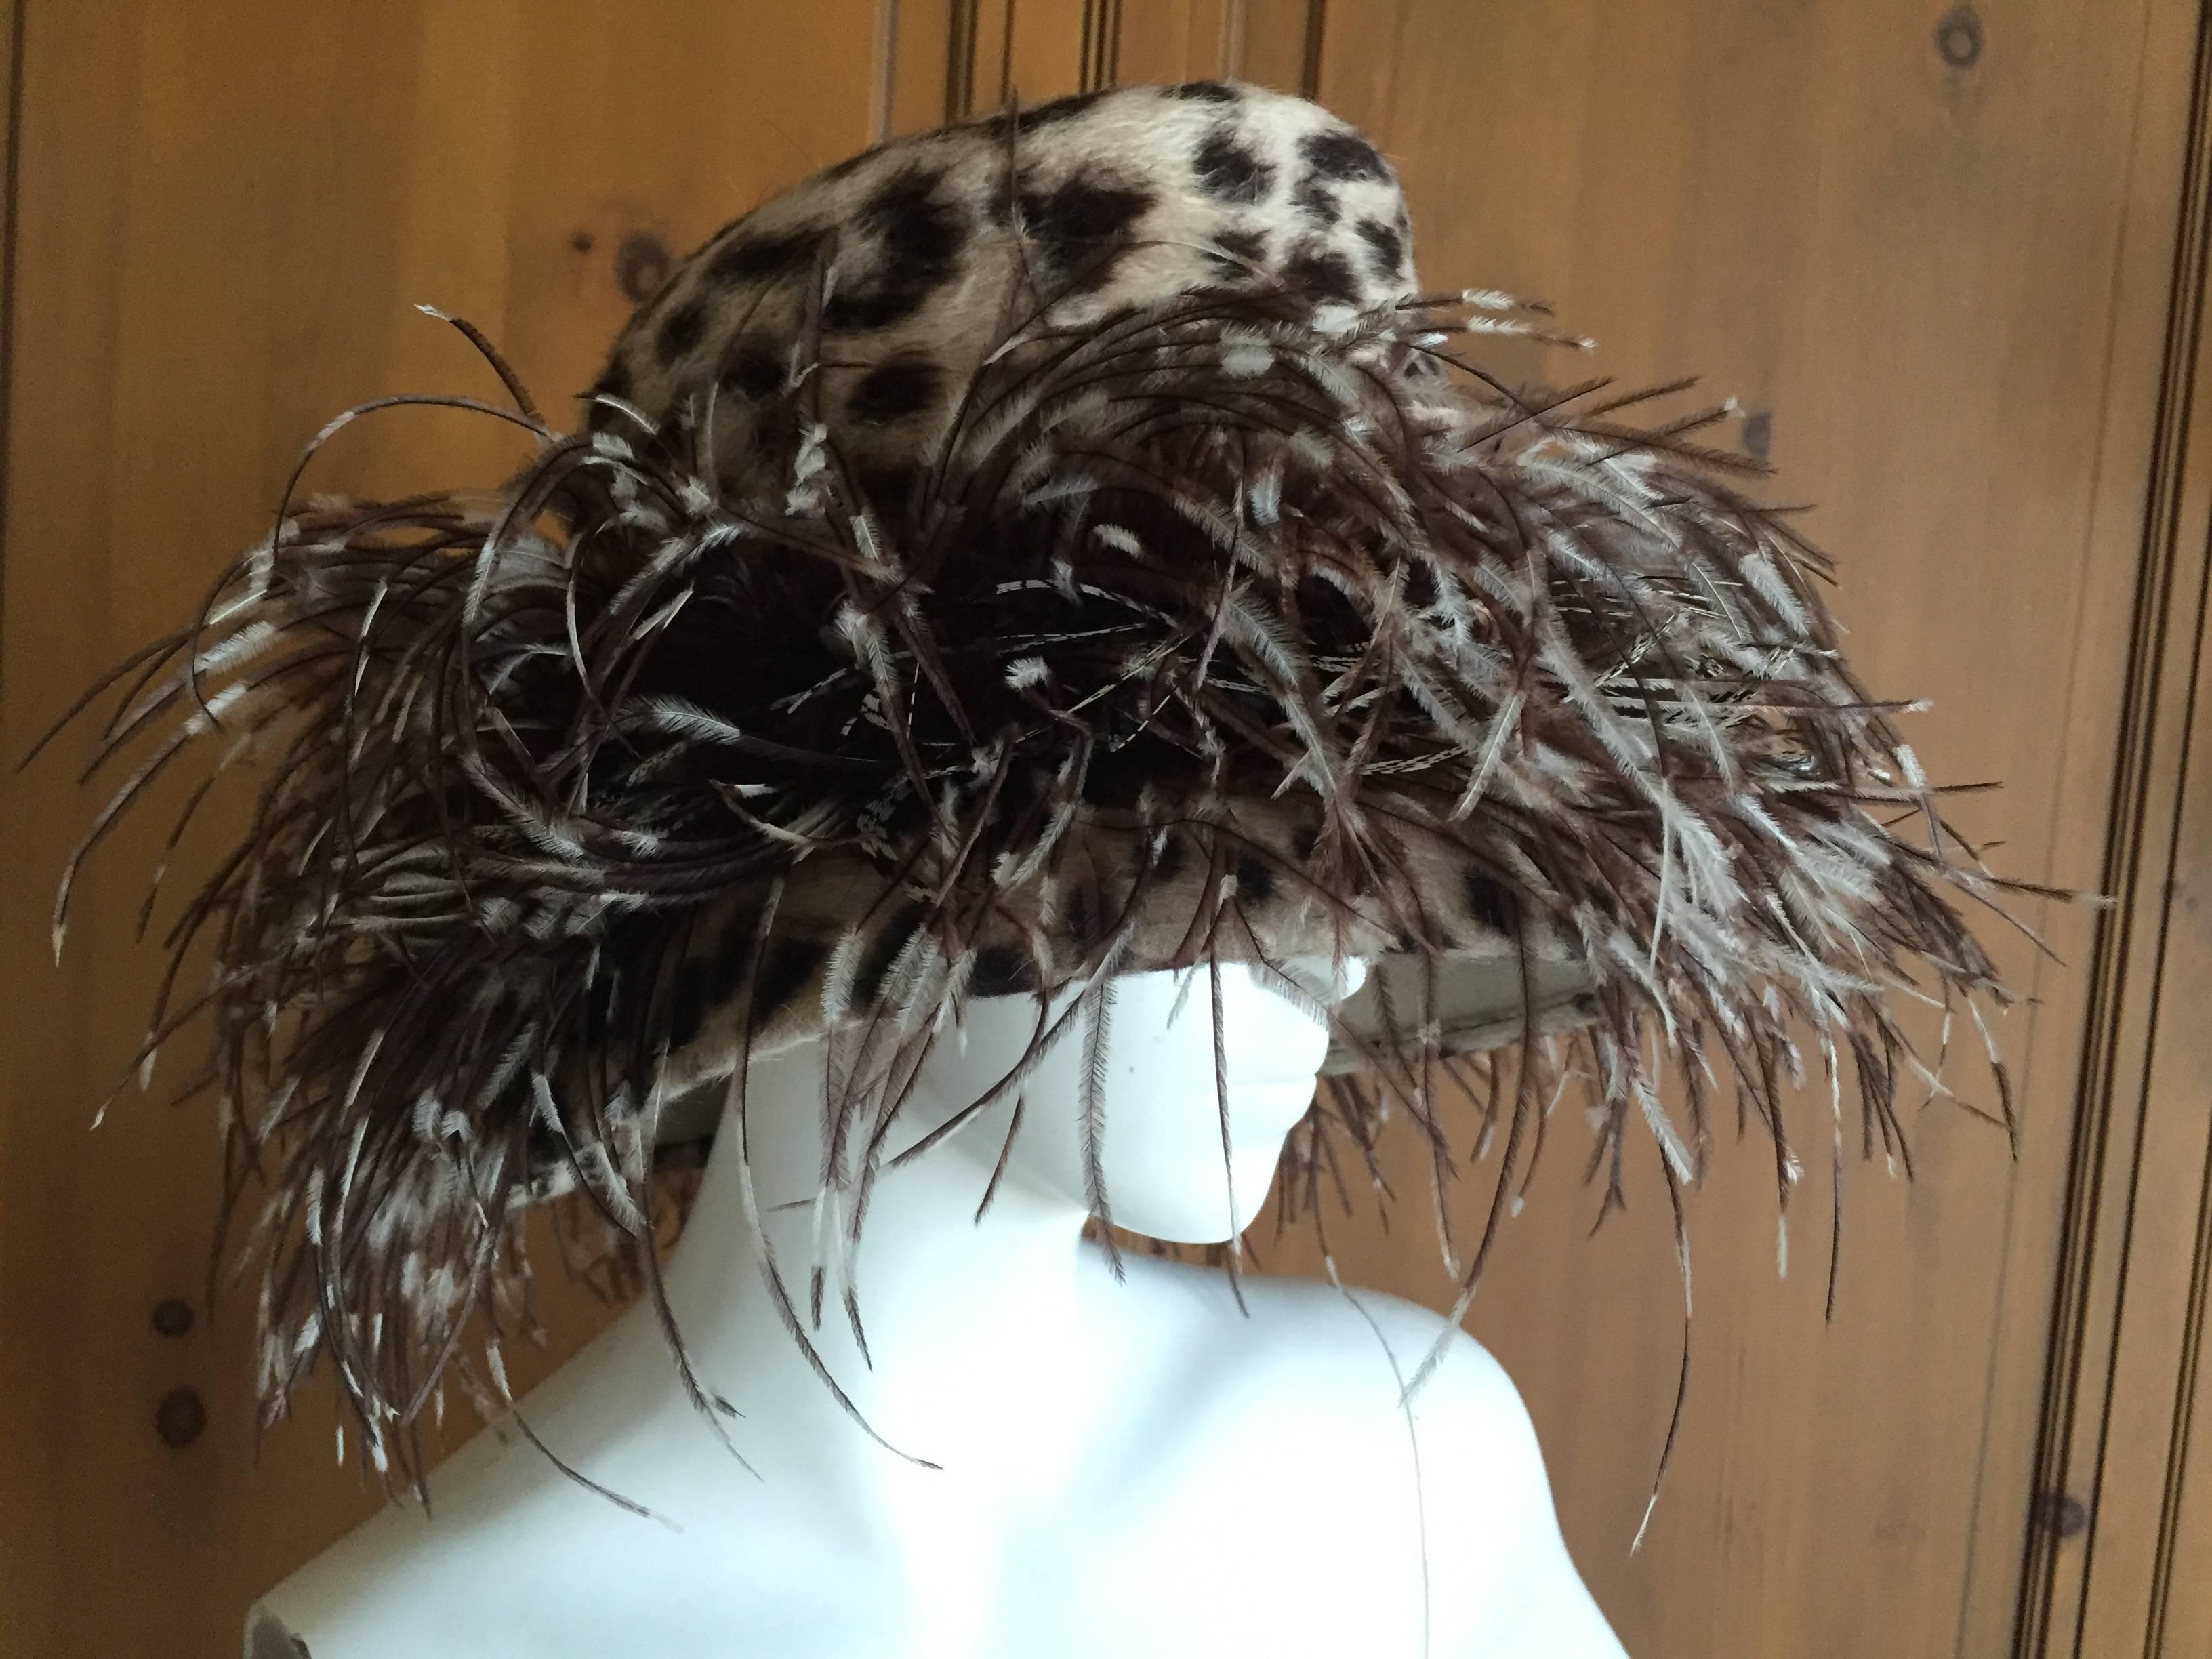 Wonderful feathered hat from Phillip Treacy London.
Featuring a gray and white faux leopard pattern hat , embellished with black white and gray feathers.
This is a large size. 
It fits my head and I wear a mens size  7 1/8.
22 1/2